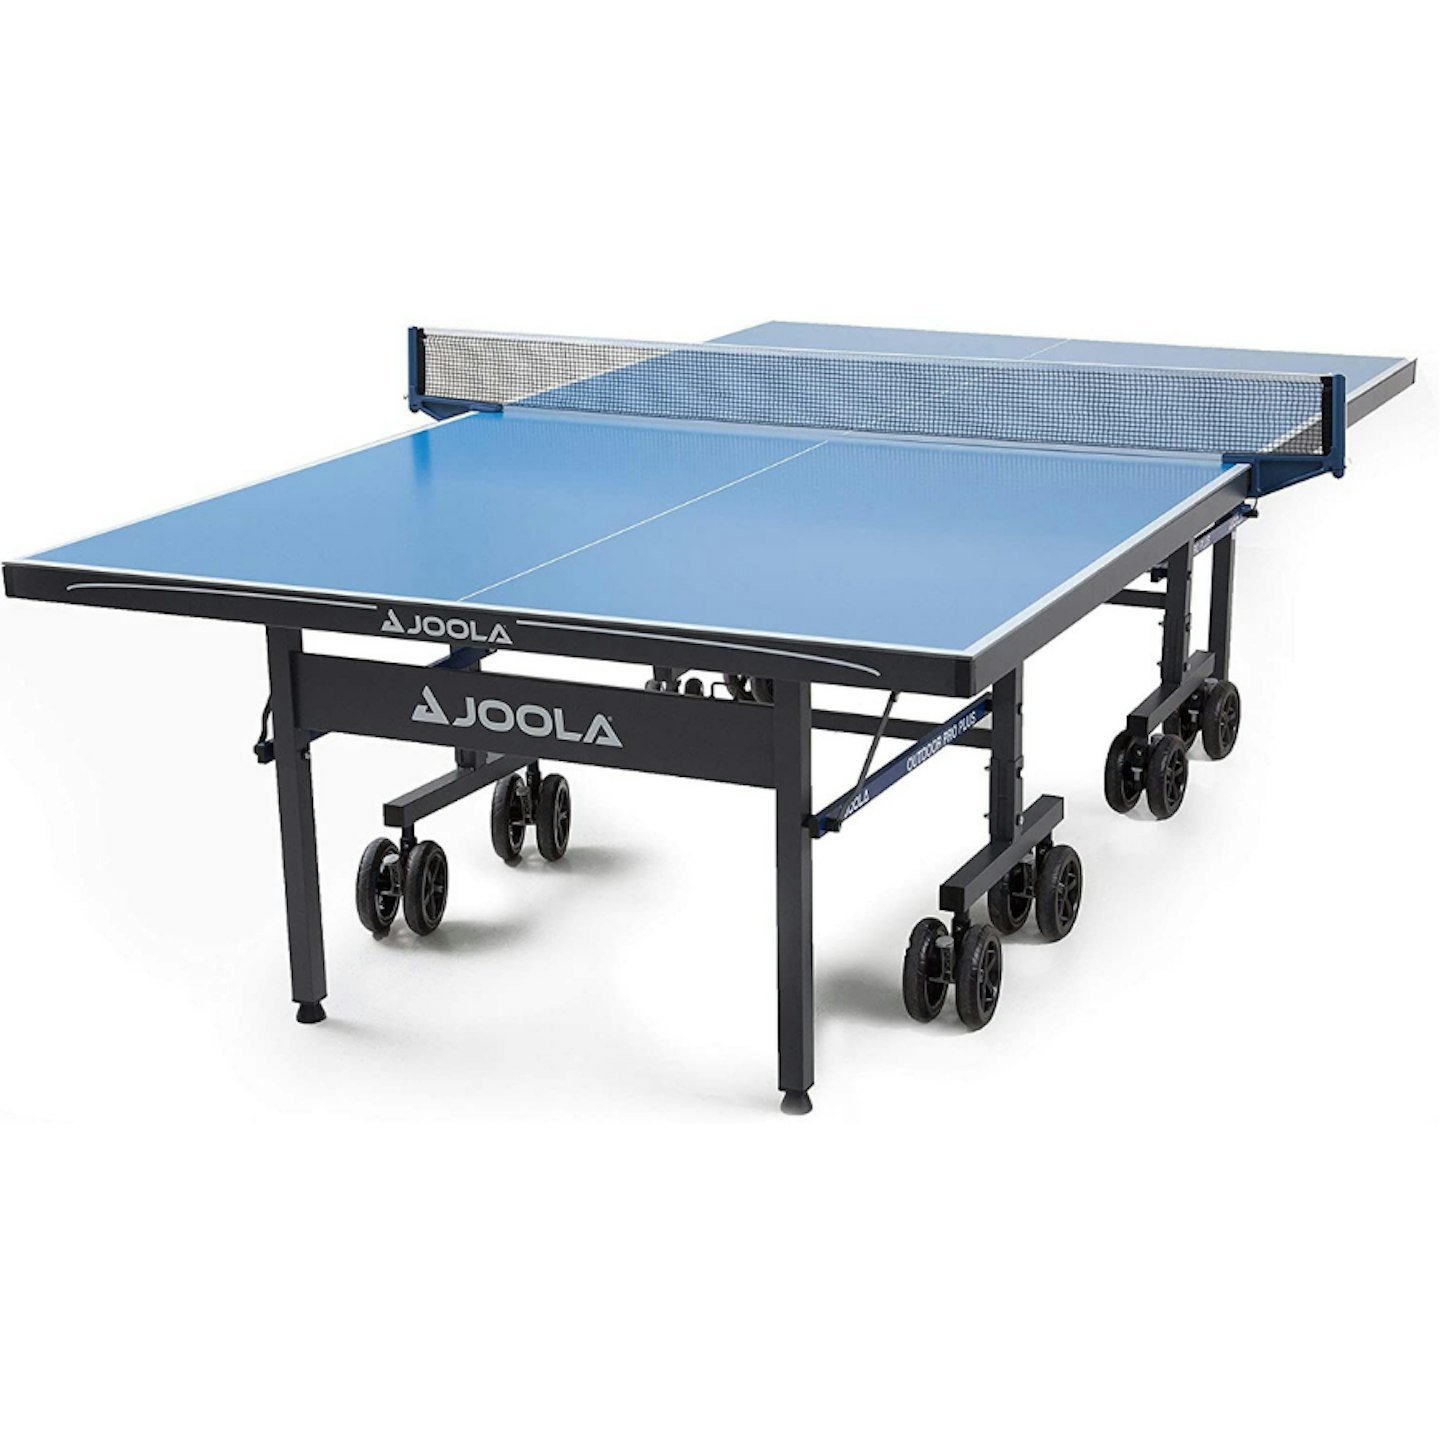 100X Outdoor Ping Pong Table - Cornilleau